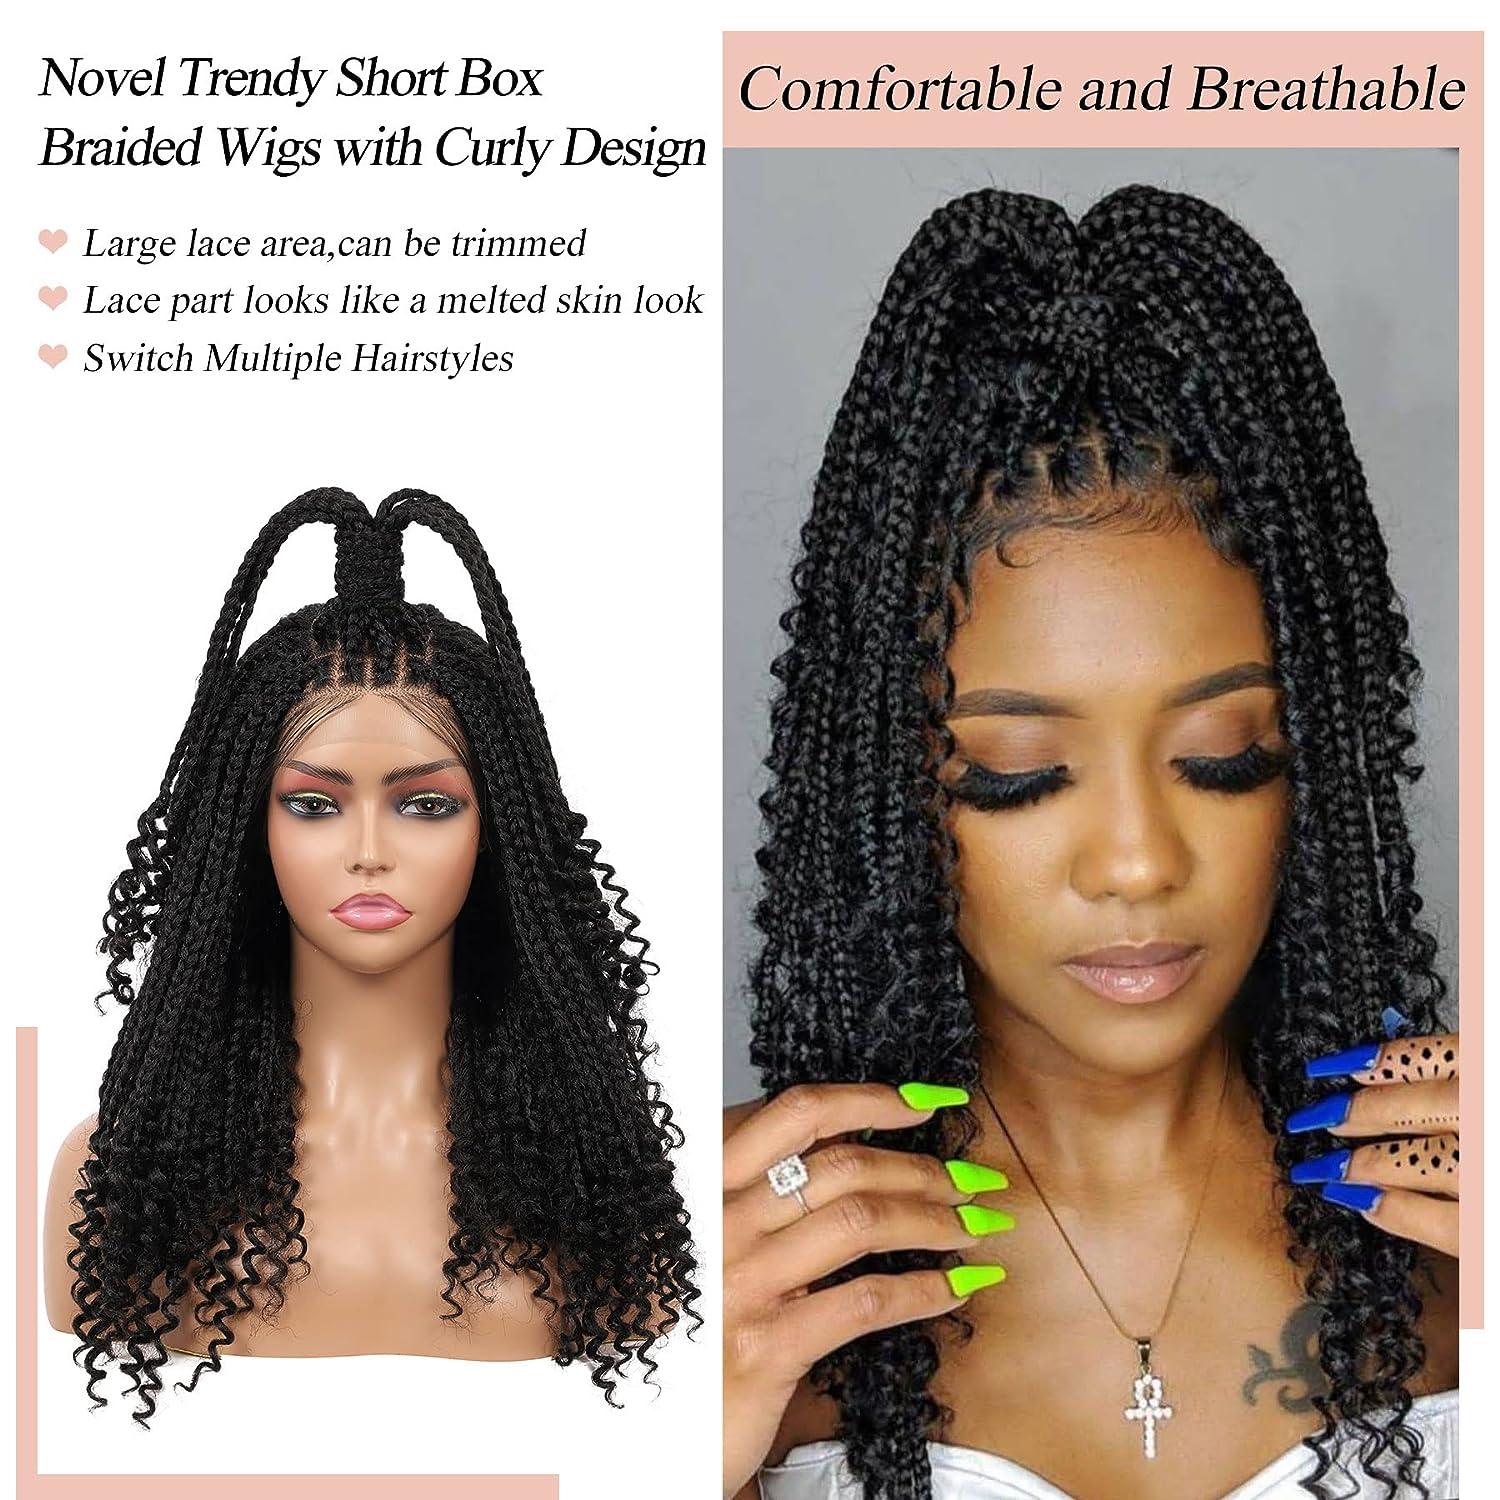 Lexqui 13X6X4 Inch Lace Front Knotless Box Braided Wigs with Boho Curly for  Women Handmade Short braided Lace Wig with Baby Hair Curl Ends Black  Synthetic Cornrow Lace Frontal Braids Hair Wig